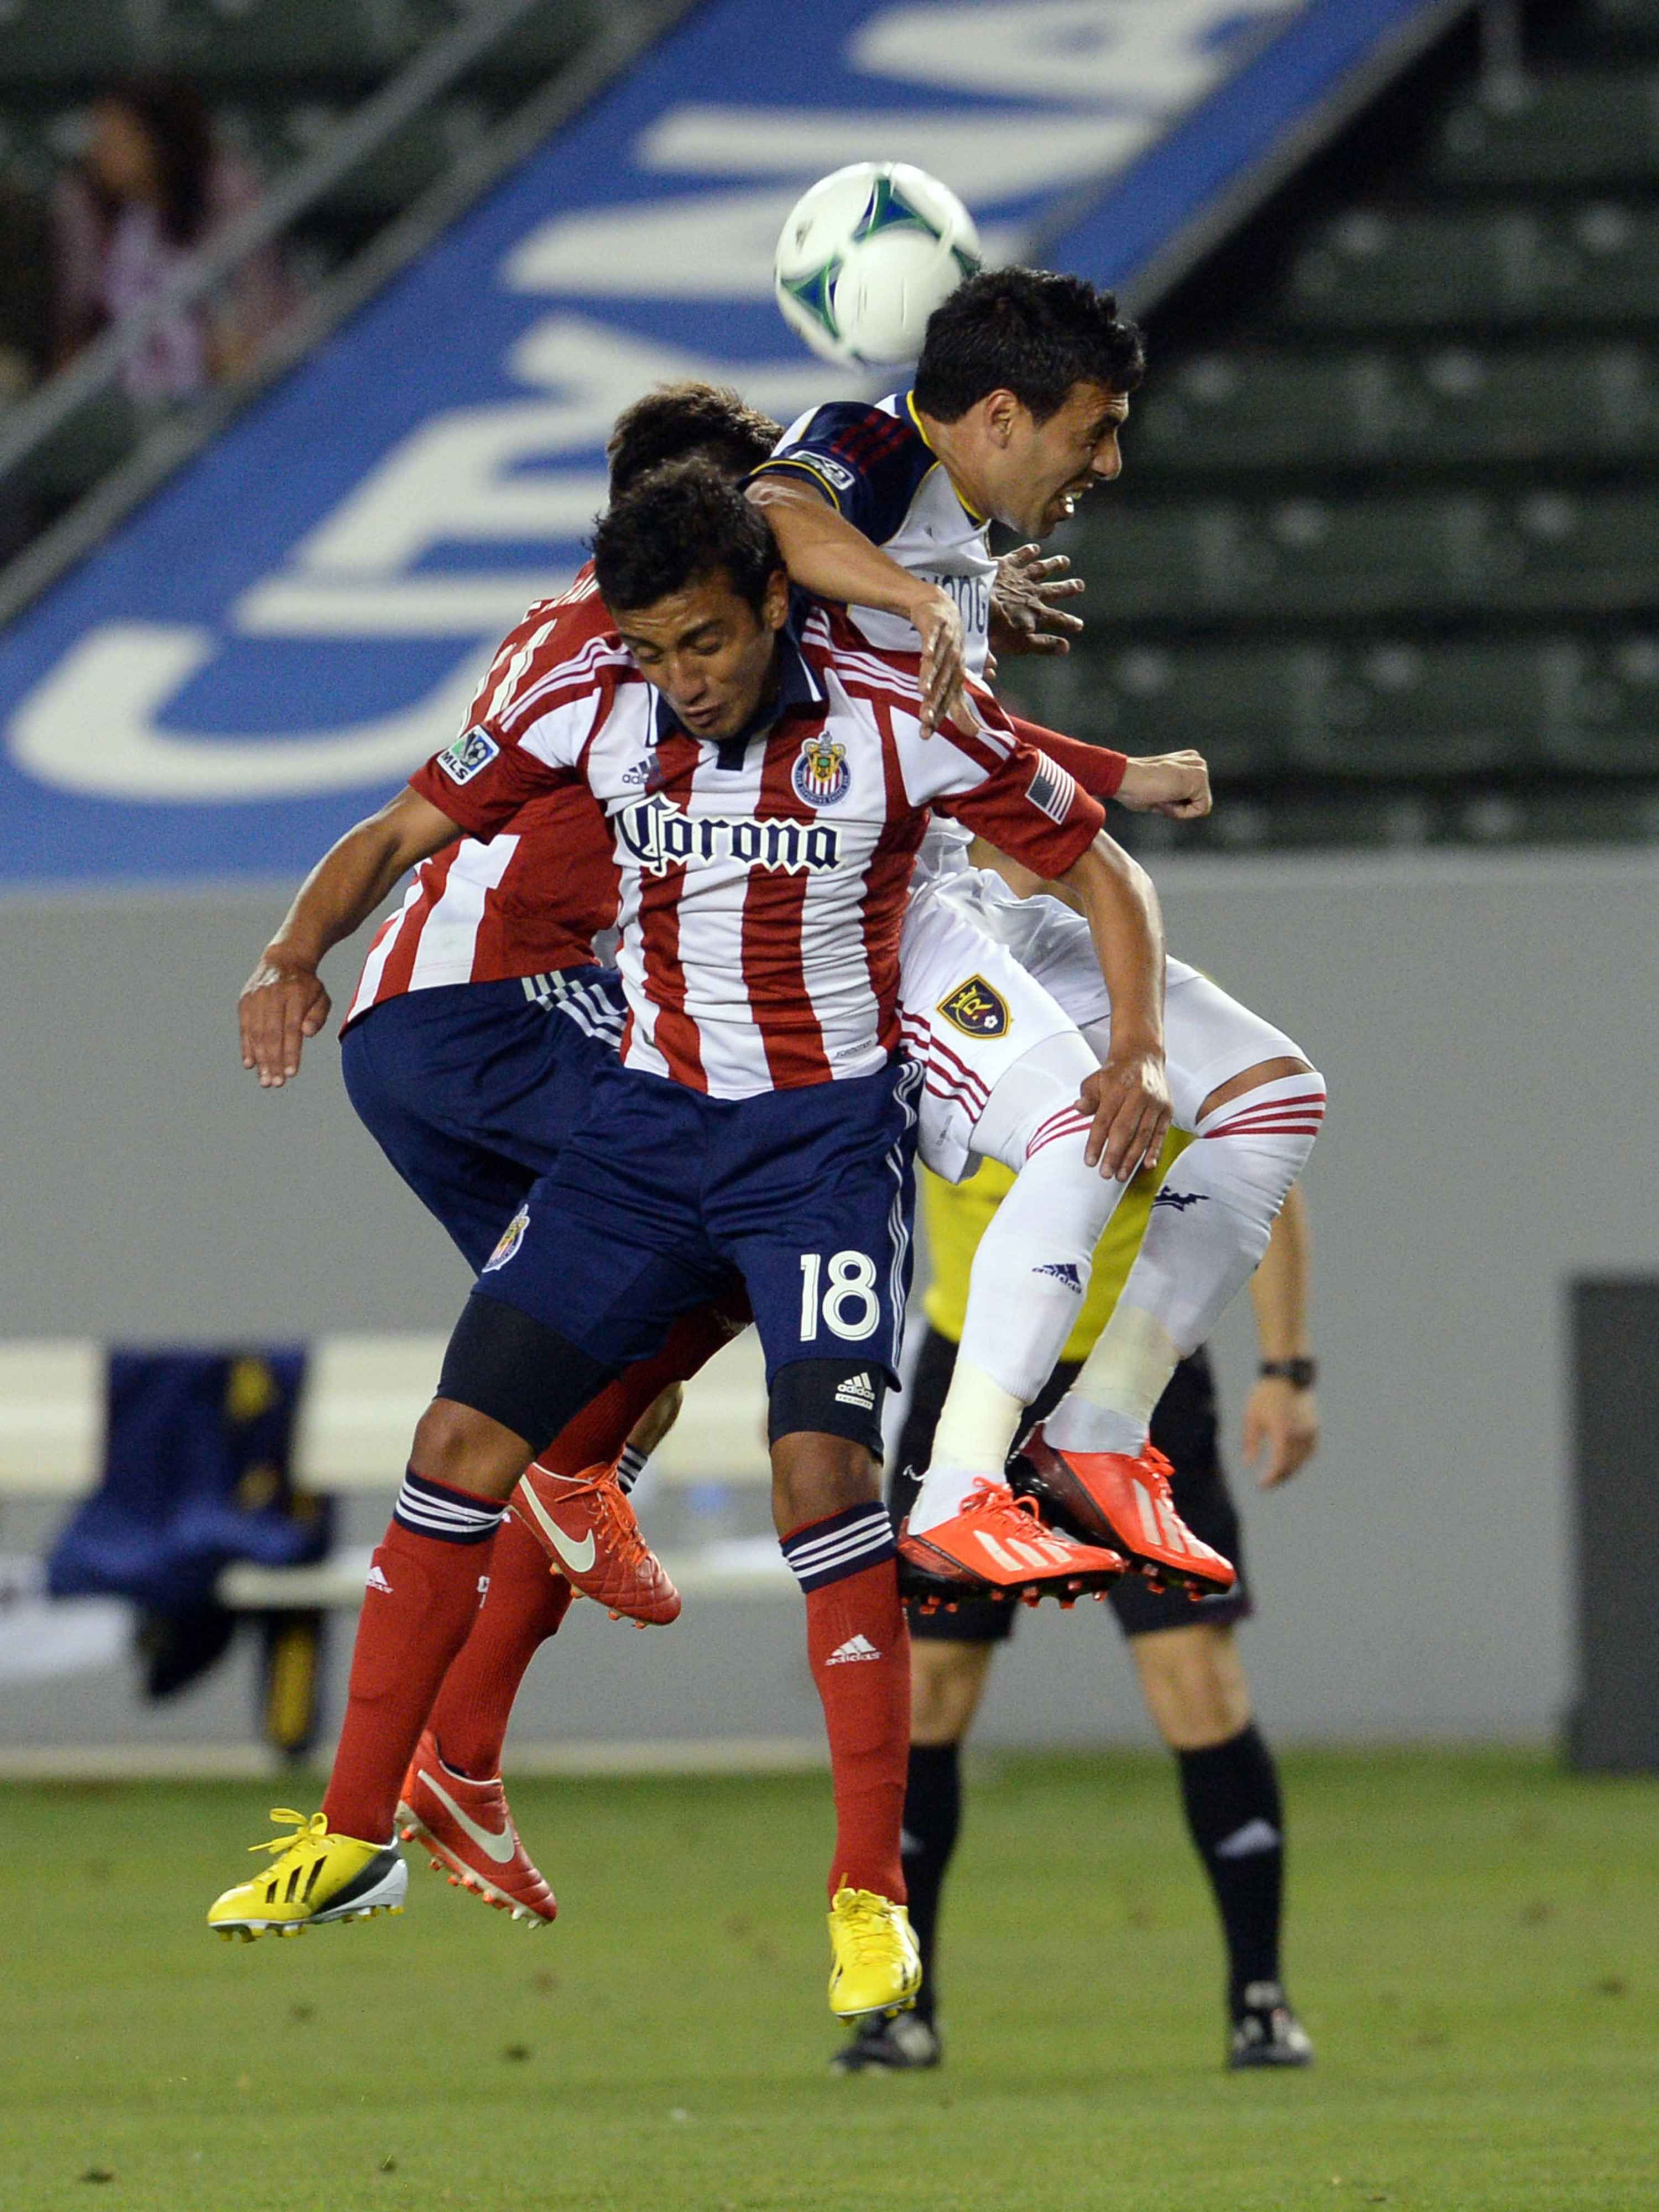 Ponce saw limited time on the field with Chivas USA.